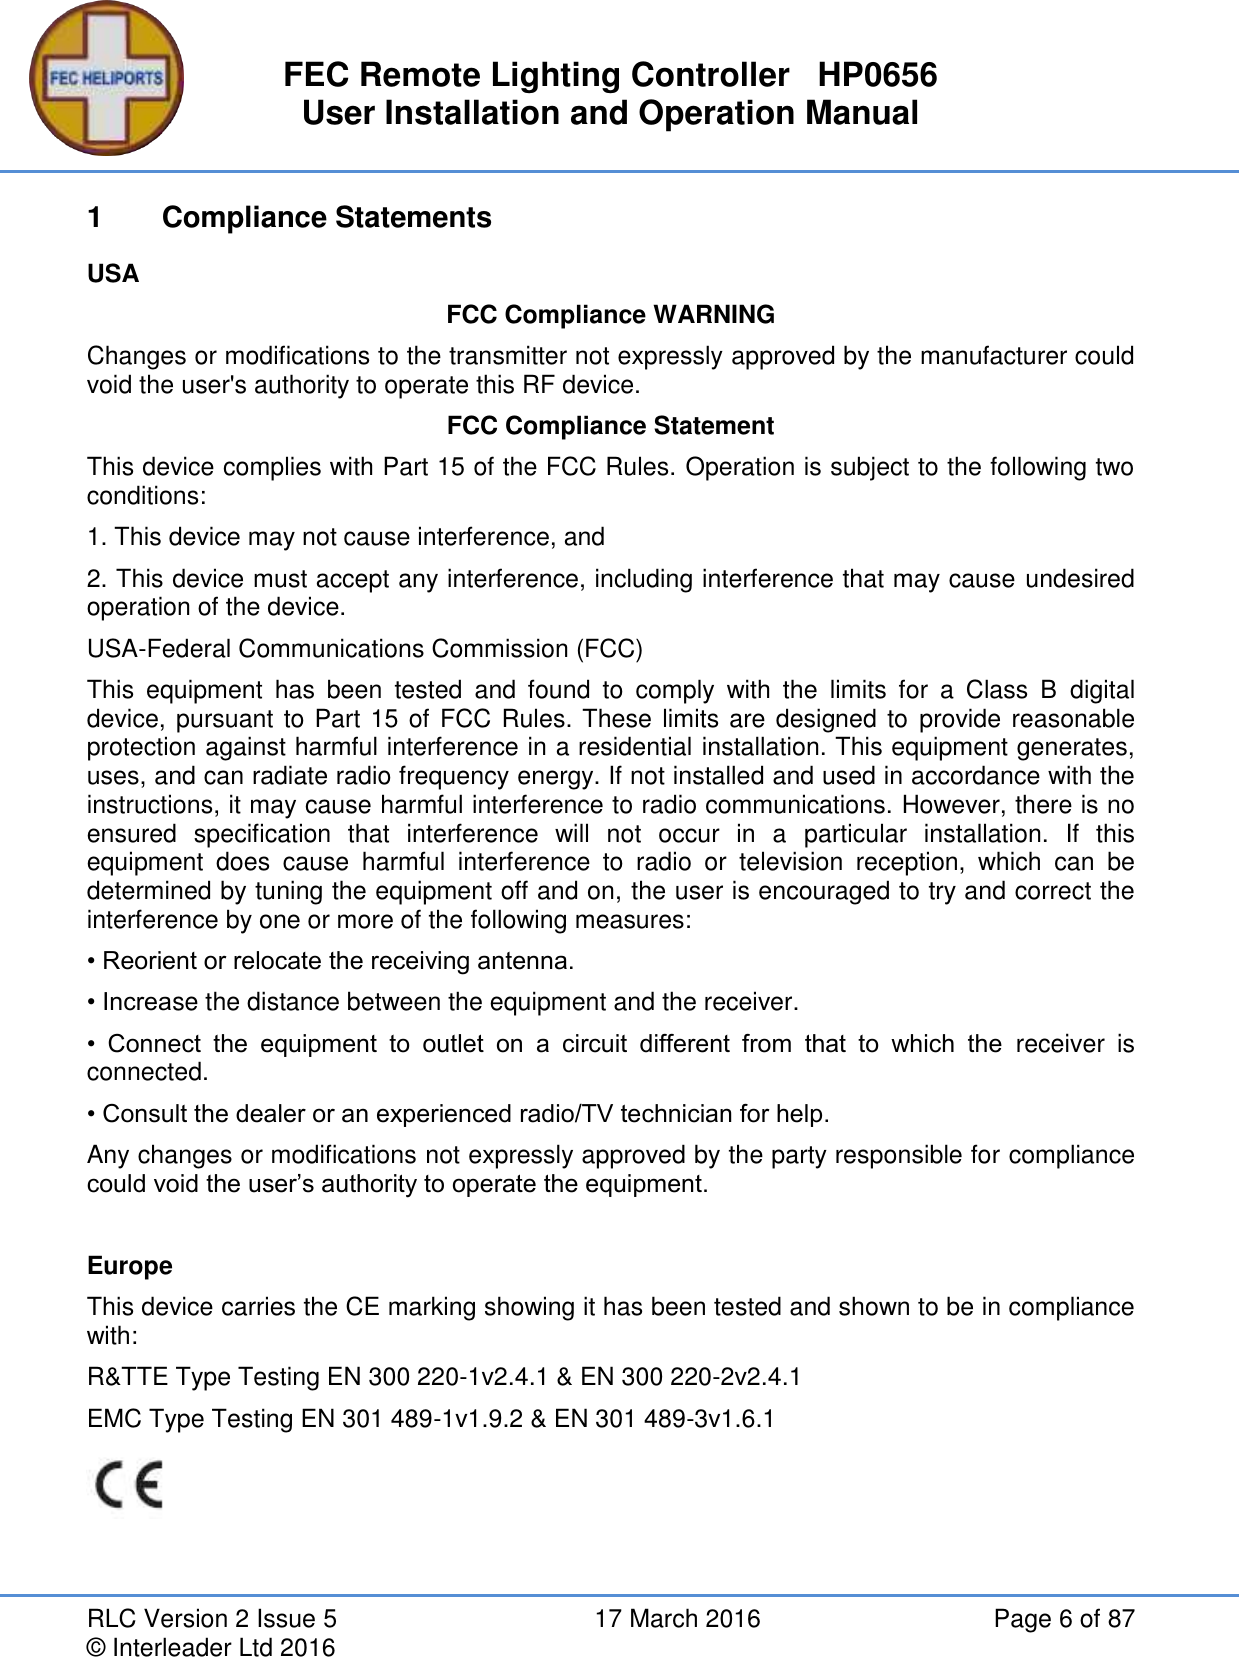 FEC Remote Lighting Controller   HP0656 User Installation and Operation Manual RLC Version 2 Issue 5  17 March 2016  Page 6 of 87 © Interleader Ltd 2016 1  Compliance Statements USA FCC Compliance WARNING Changes or modifications to the transmitter not expressly approved by the manufacturer could void the user&apos;s authority to operate this RF device. FCC Compliance Statement This device complies with Part 15 of the FCC Rules. Operation is subject to the following two conditions: 1. This device may not cause interference, and 2. This device must accept any interference, including interference that may cause undesired operation of the device. USA-Federal Communications Commission (FCC) This  equipment  has  been  tested  and  found  to  comply  with  the  limits  for  a  Class  B  digital device, pursuant to Part 15 of FCC Rules. These limits are designed to provide reasonable protection against harmful interference in a residential installation. This equipment generates, uses, and can radiate radio frequency energy. If not installed and used in accordance with the instructions, it may cause harmful interference to radio communications. However, there is no ensured  specification  that  interference  will  not  occur  in  a  particular  installation.  If  this equipment  does  cause  harmful  interference  to  radio  or  television  reception,  which  can  be determined by tuning the equipment off and on, the user is encouraged to try and correct the interference by one or more of the following measures: • Reorient or relocate the receiving antenna. • Increase the distance between the equipment and the receiver. •  Connect  the  equipment  to  outlet  on  a  circuit  different  from  that  to  which  the  receiver  is connected. • Consult the dealer or an experienced radio/TV technician for help. Any changes or modifications not expressly approved by the party responsible for compliance could void the user’s authority to operate the equipment.  Europe This device carries the CE marking showing it has been tested and shown to be in compliance with: R&amp;TTE Type Testing EN 300 220-1v2.4.1 &amp; EN 300 220-2v2.4.1 EMC Type Testing EN 301 489-1v1.9.2 &amp; EN 301 489-3v1.6.1  